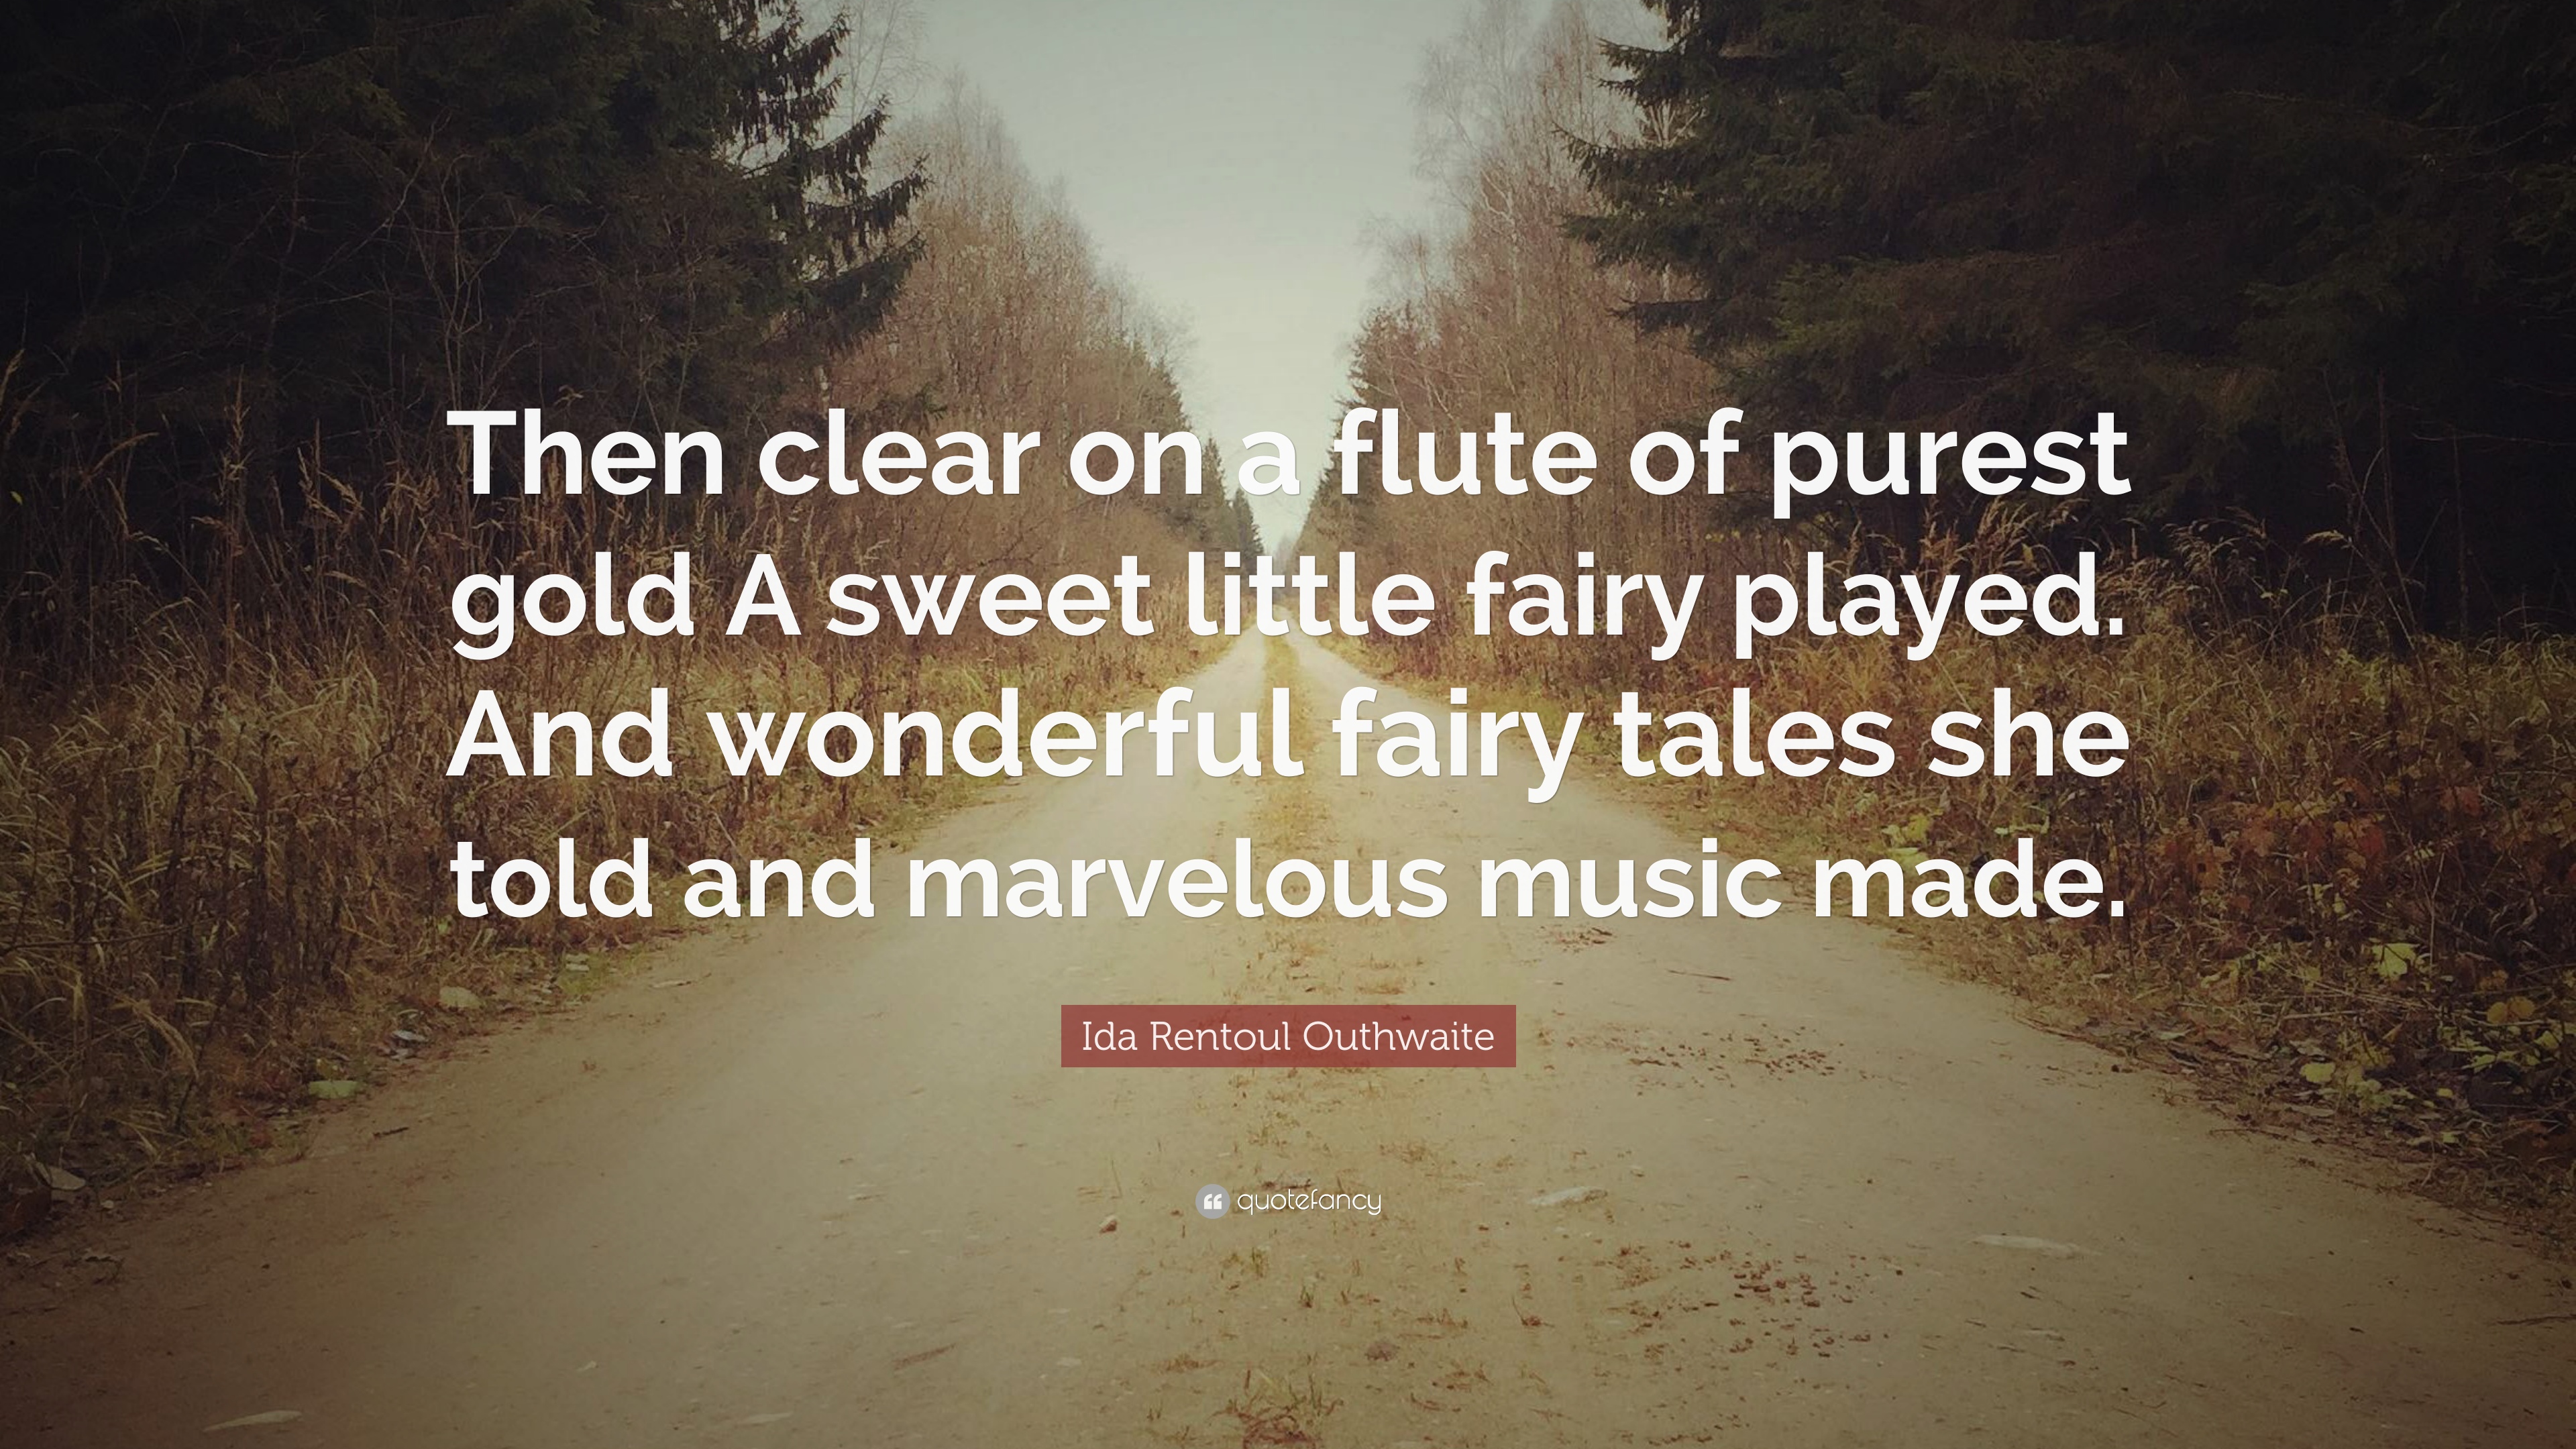 Ida Rentoul Outhwaite Quote: “Then clear on a flute of purest gold A